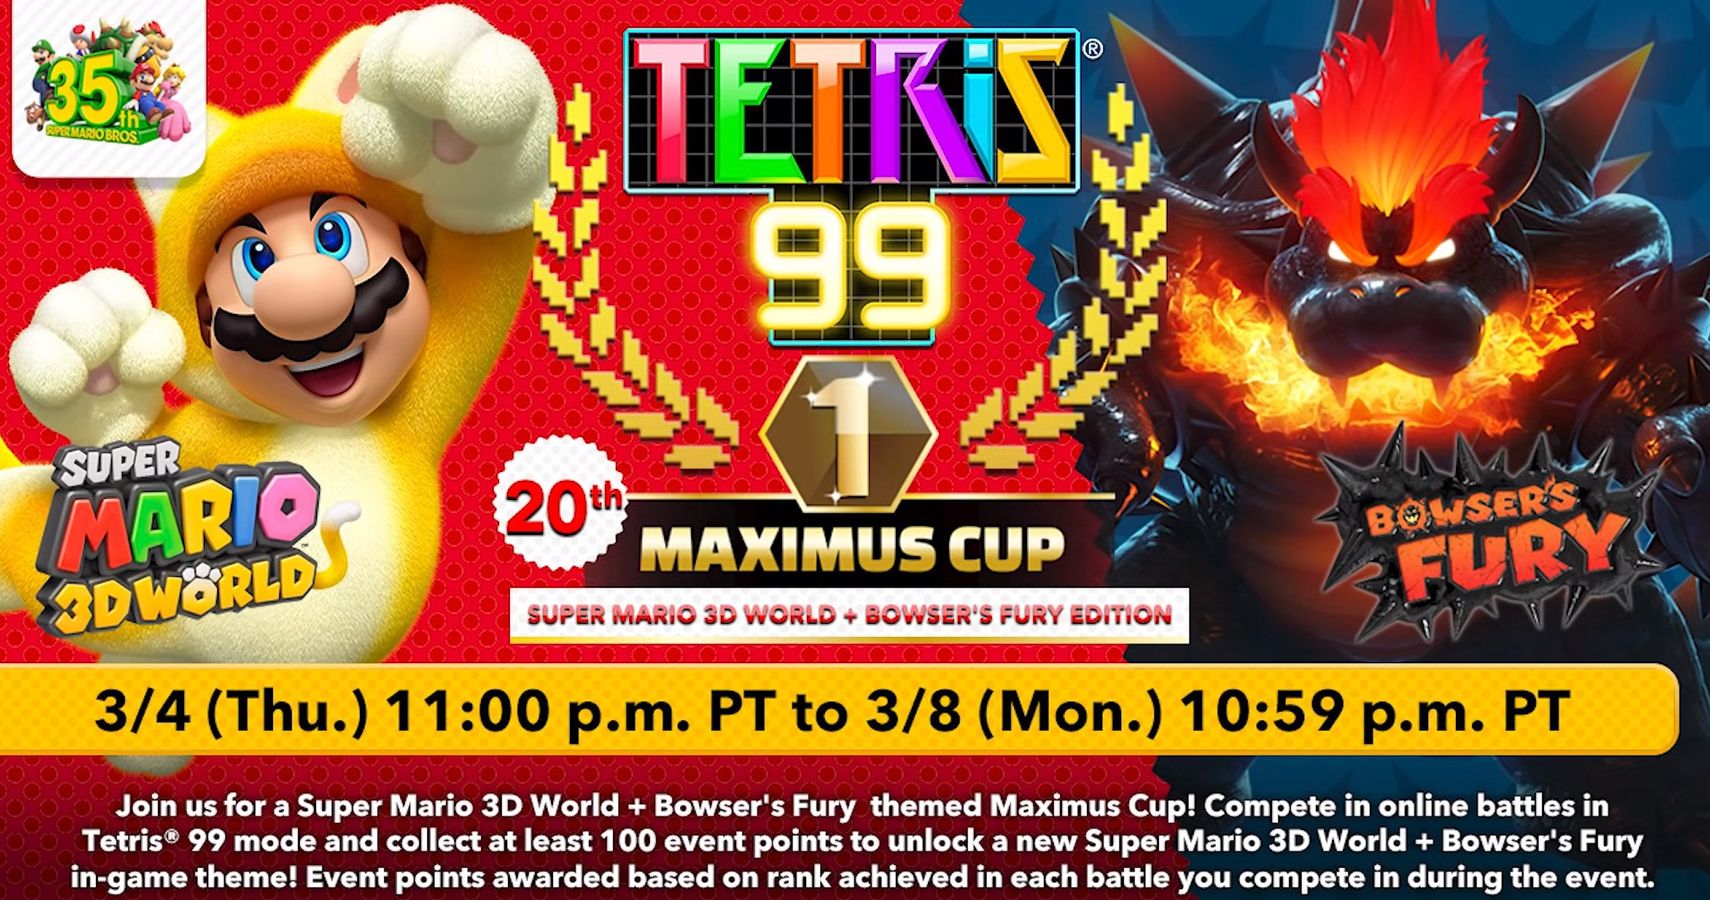 Giga Bowser now haunts players in Tetris as Super Mario 3D World + Bowser's Fury heads To Tetris 99